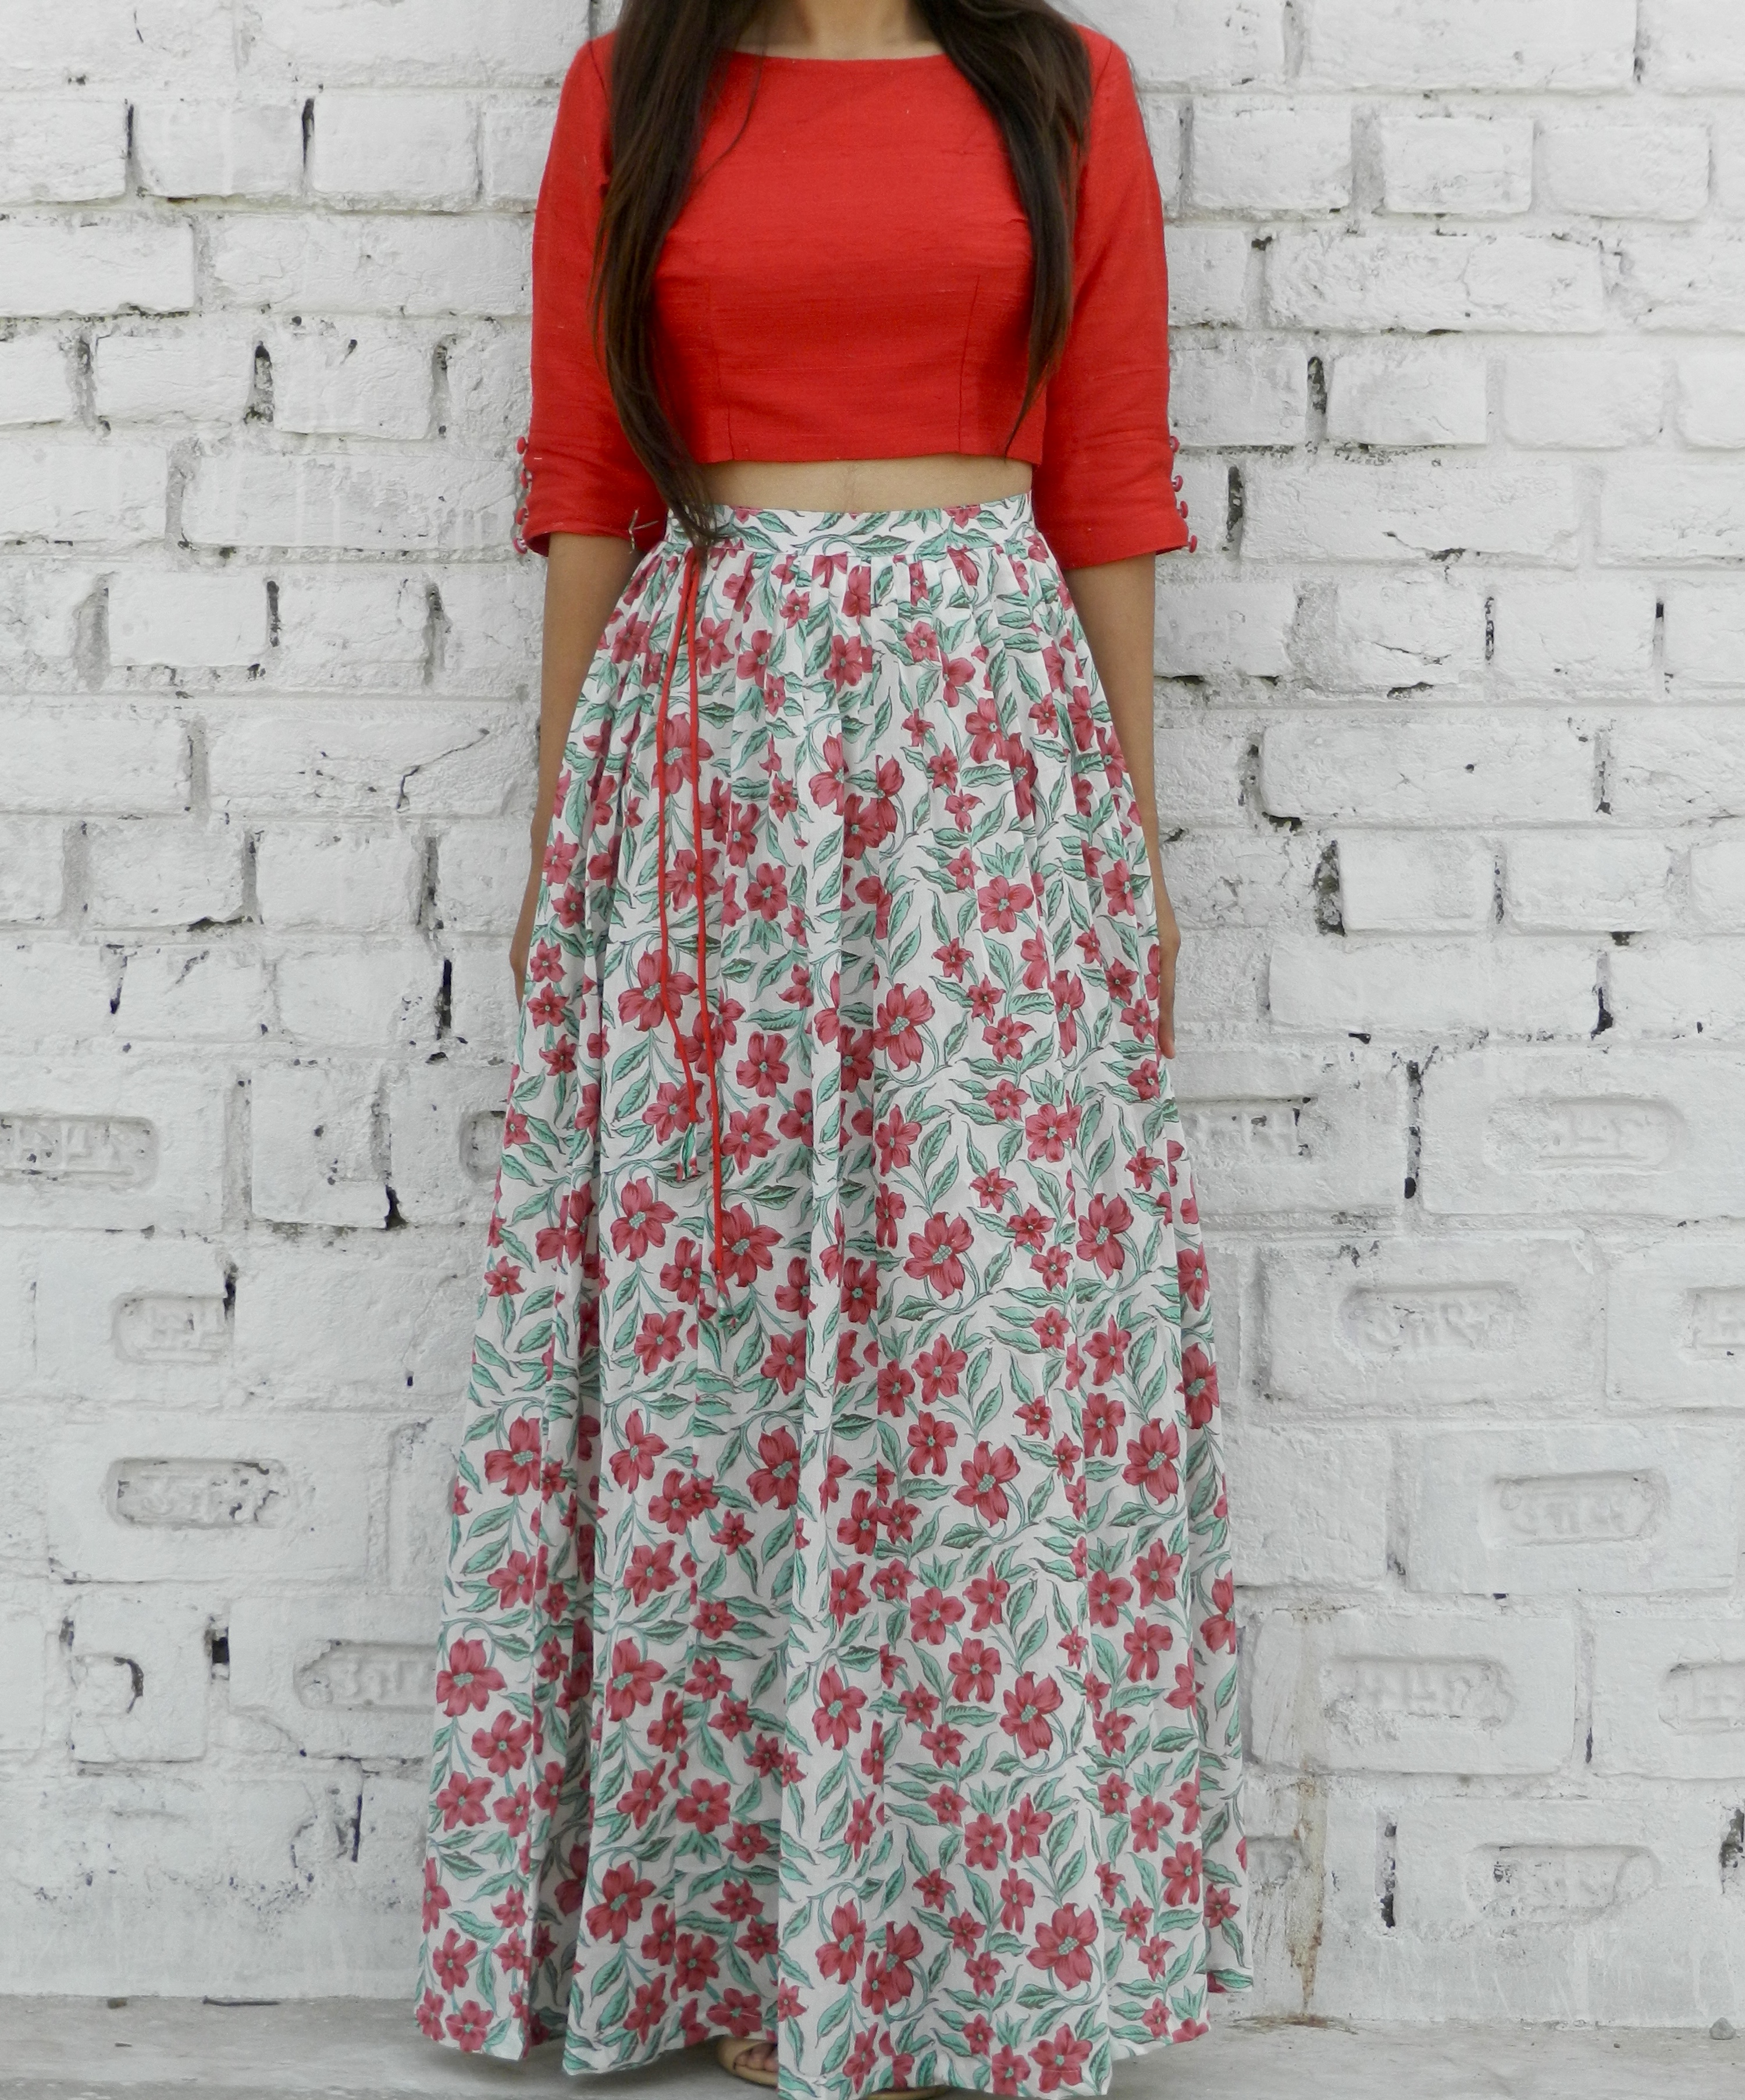 Raw silk top and red lily skirt set by Alaya | The Secret Label